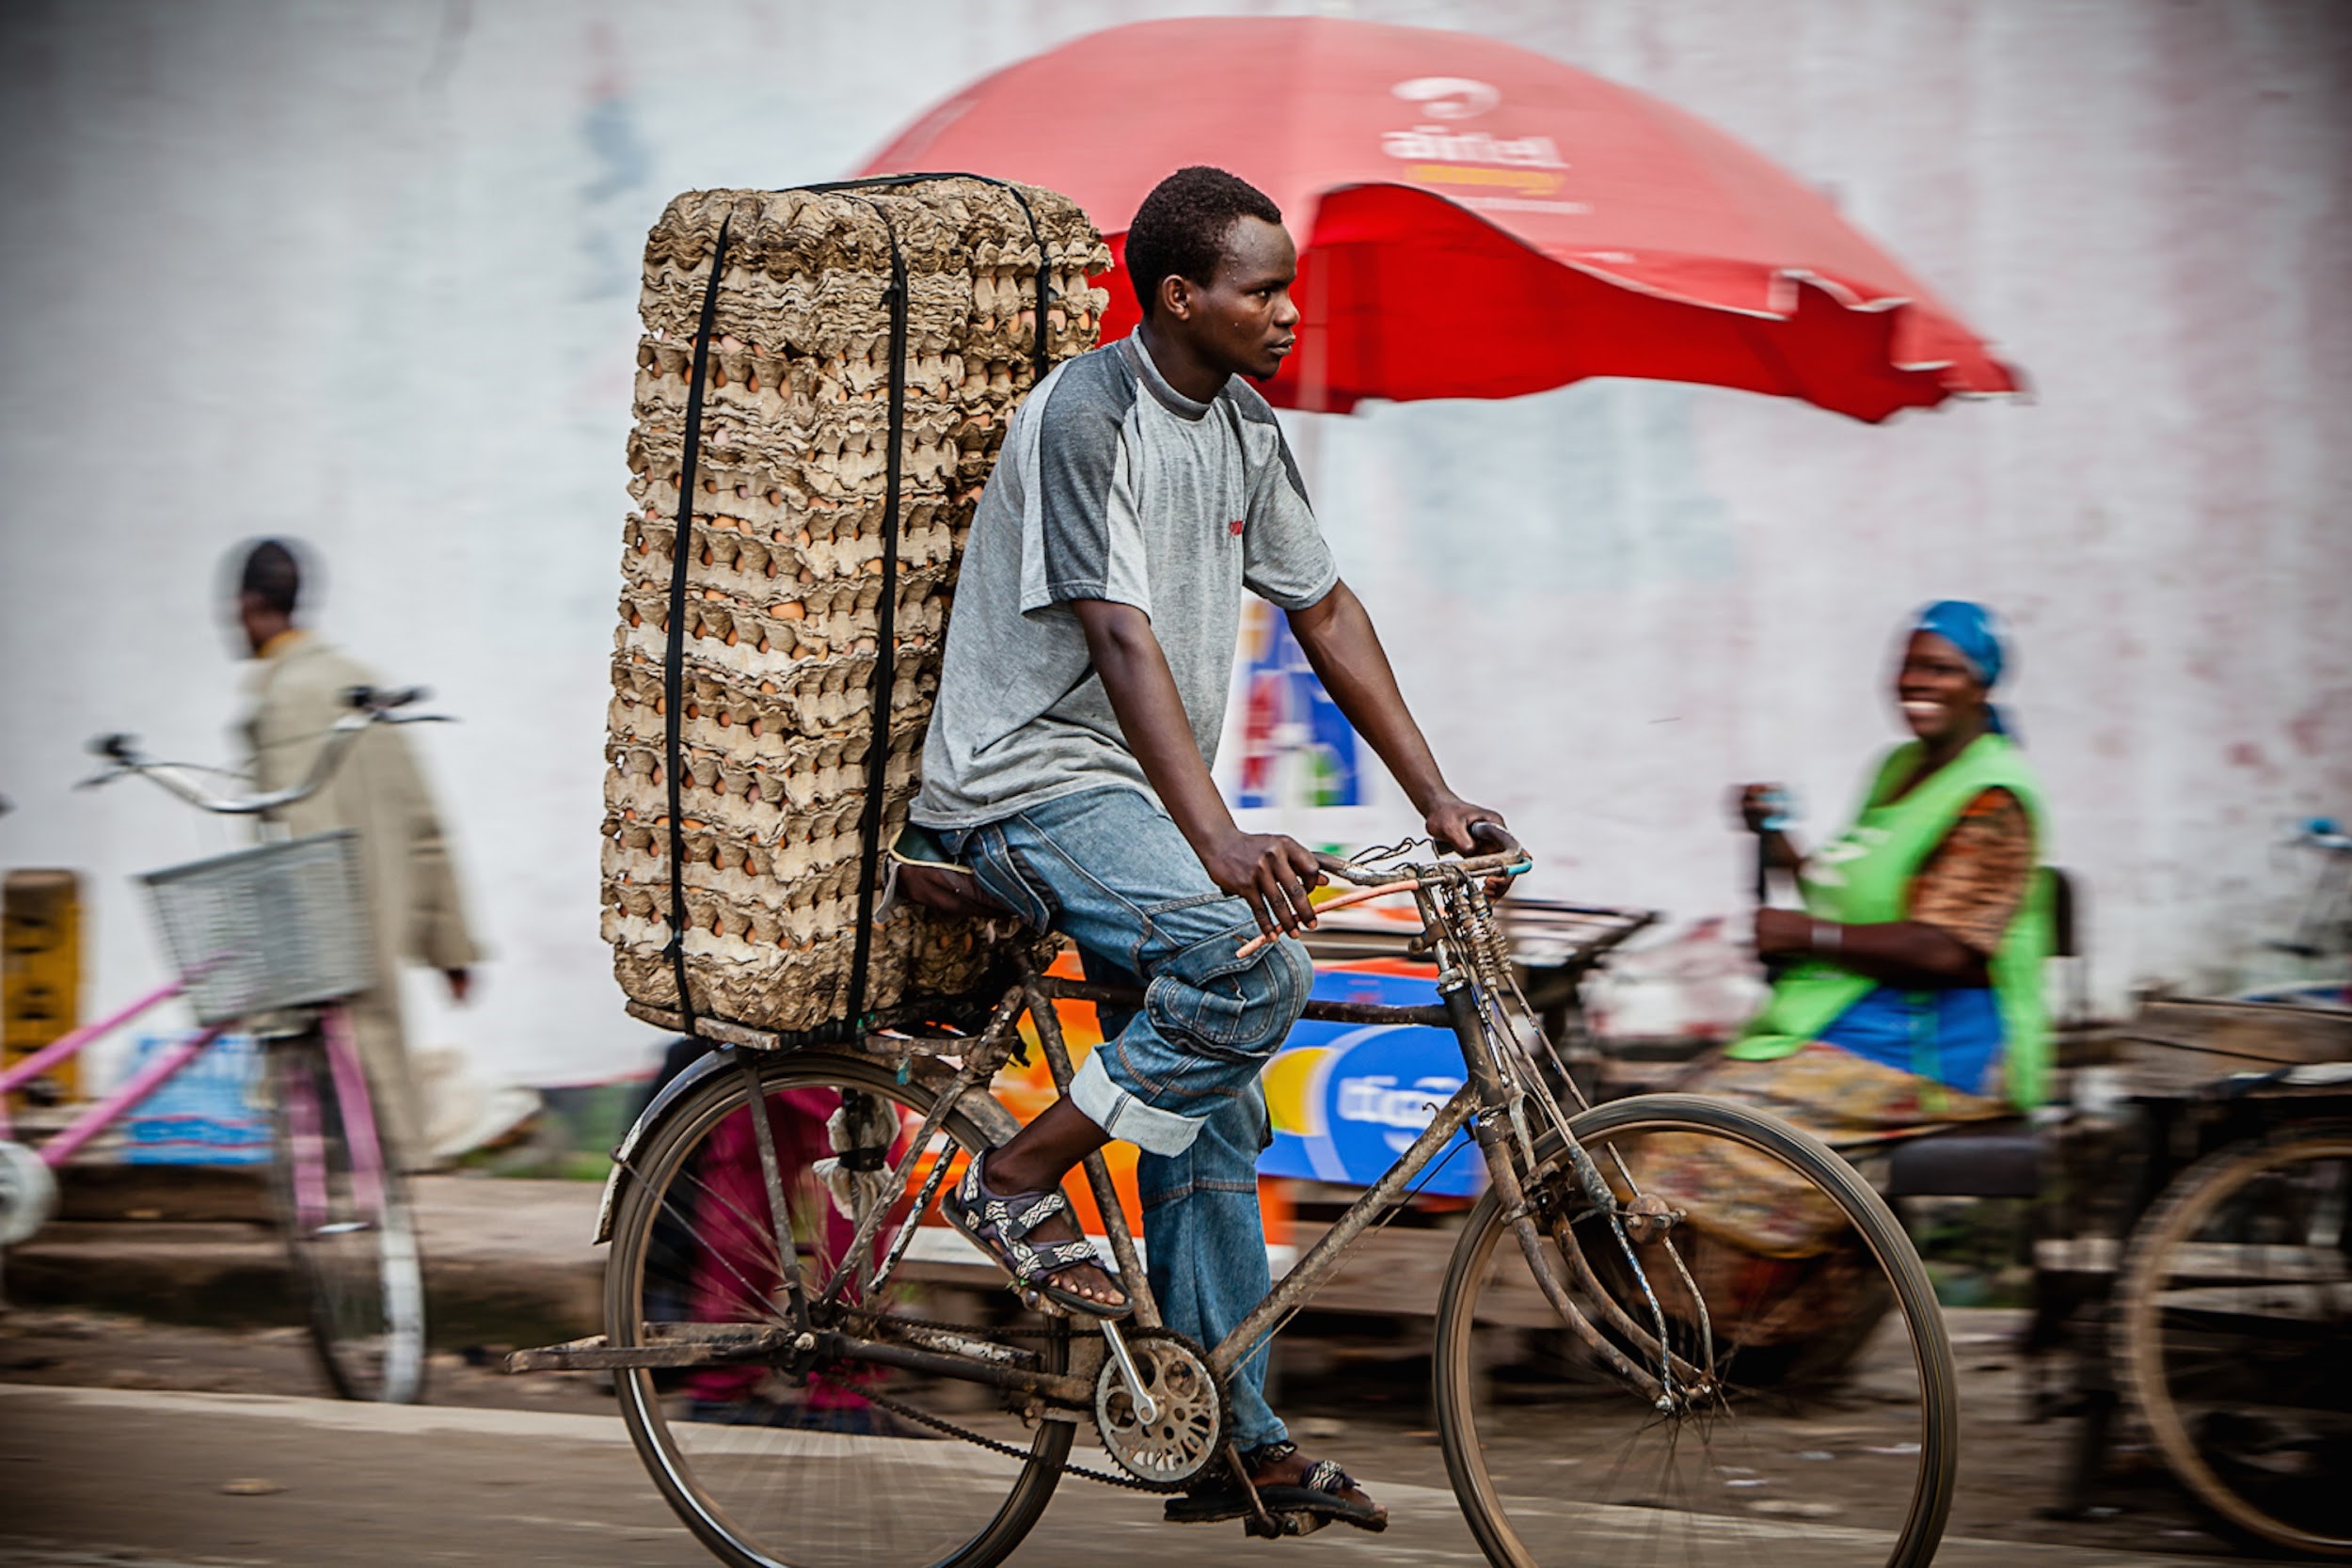 A man rides a bicycle on a market road in